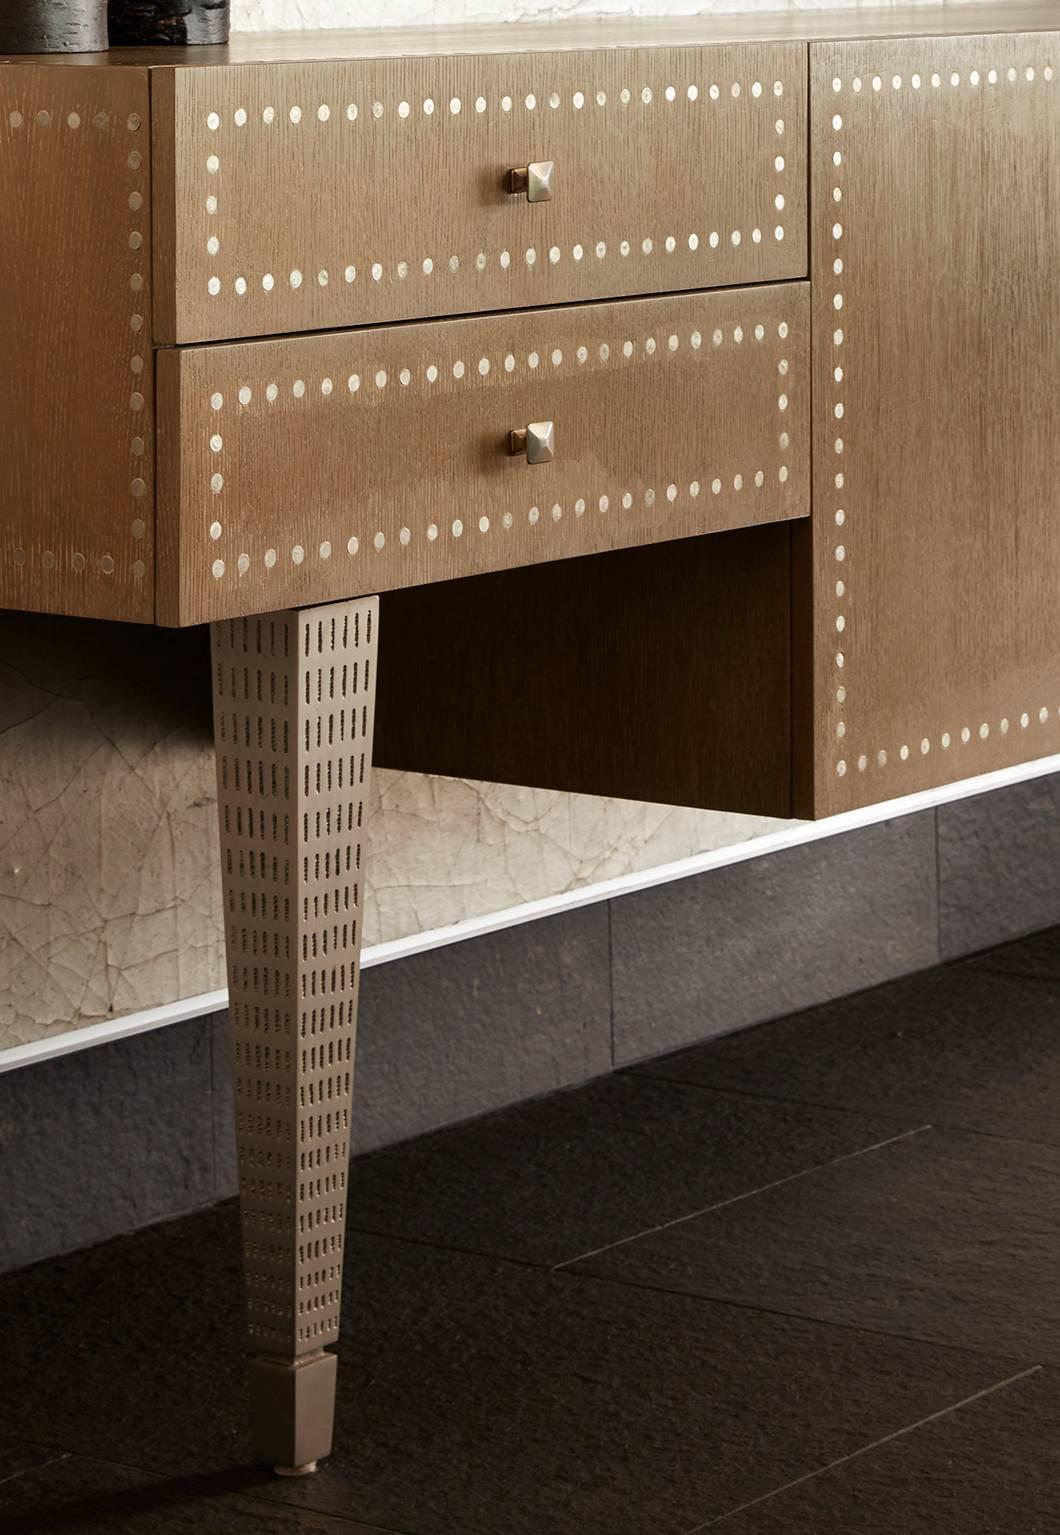 Shown in silver oak finish with pitted white bronze legs, nailhead detail, touch latch doors and adjustable shelving.
The city console by Bradley Bayou home can be customized.